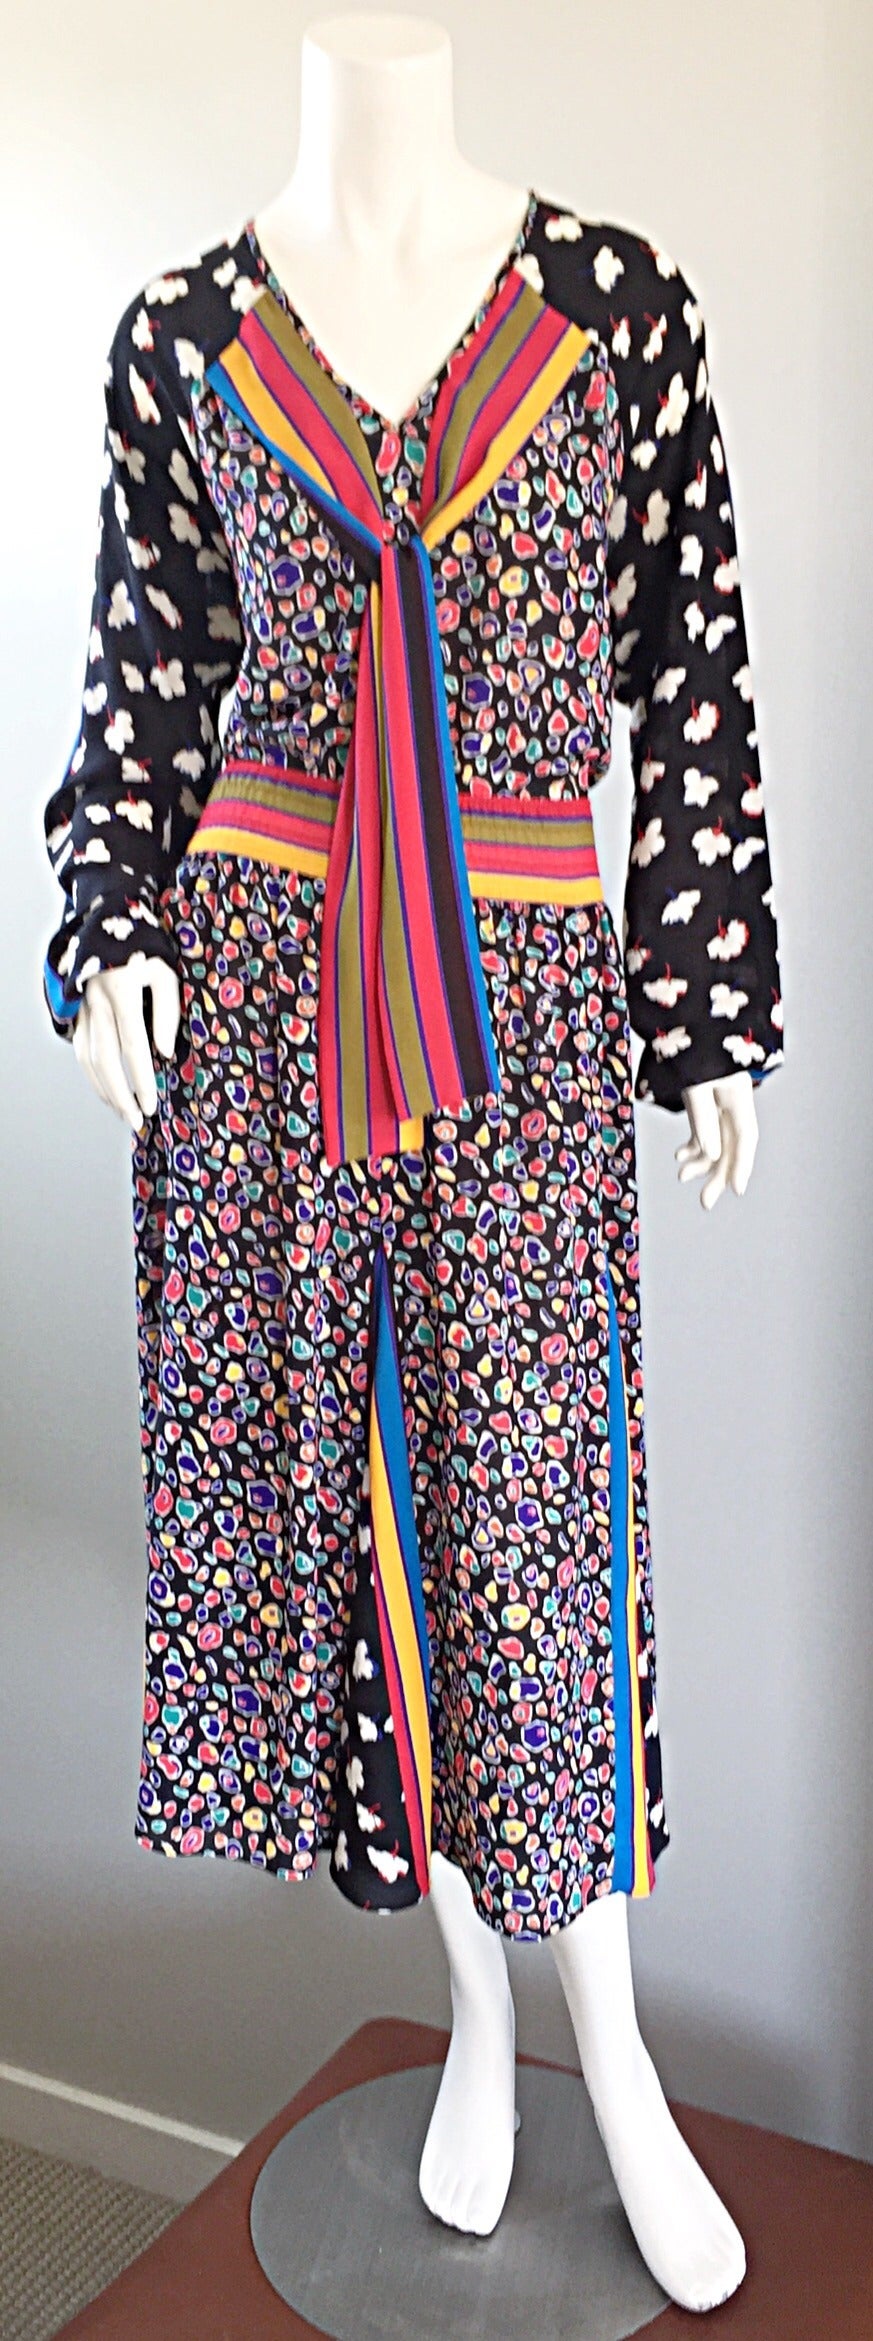 Amazing vintage 1980s dress, by Diane Fres / Freis! Op-art prints, with flowers on the sleeves, geometric shapes and stripes throughout body. Attached tie at neck. Looks amazing on! Can easily transition from day to night. Looks great with flats,